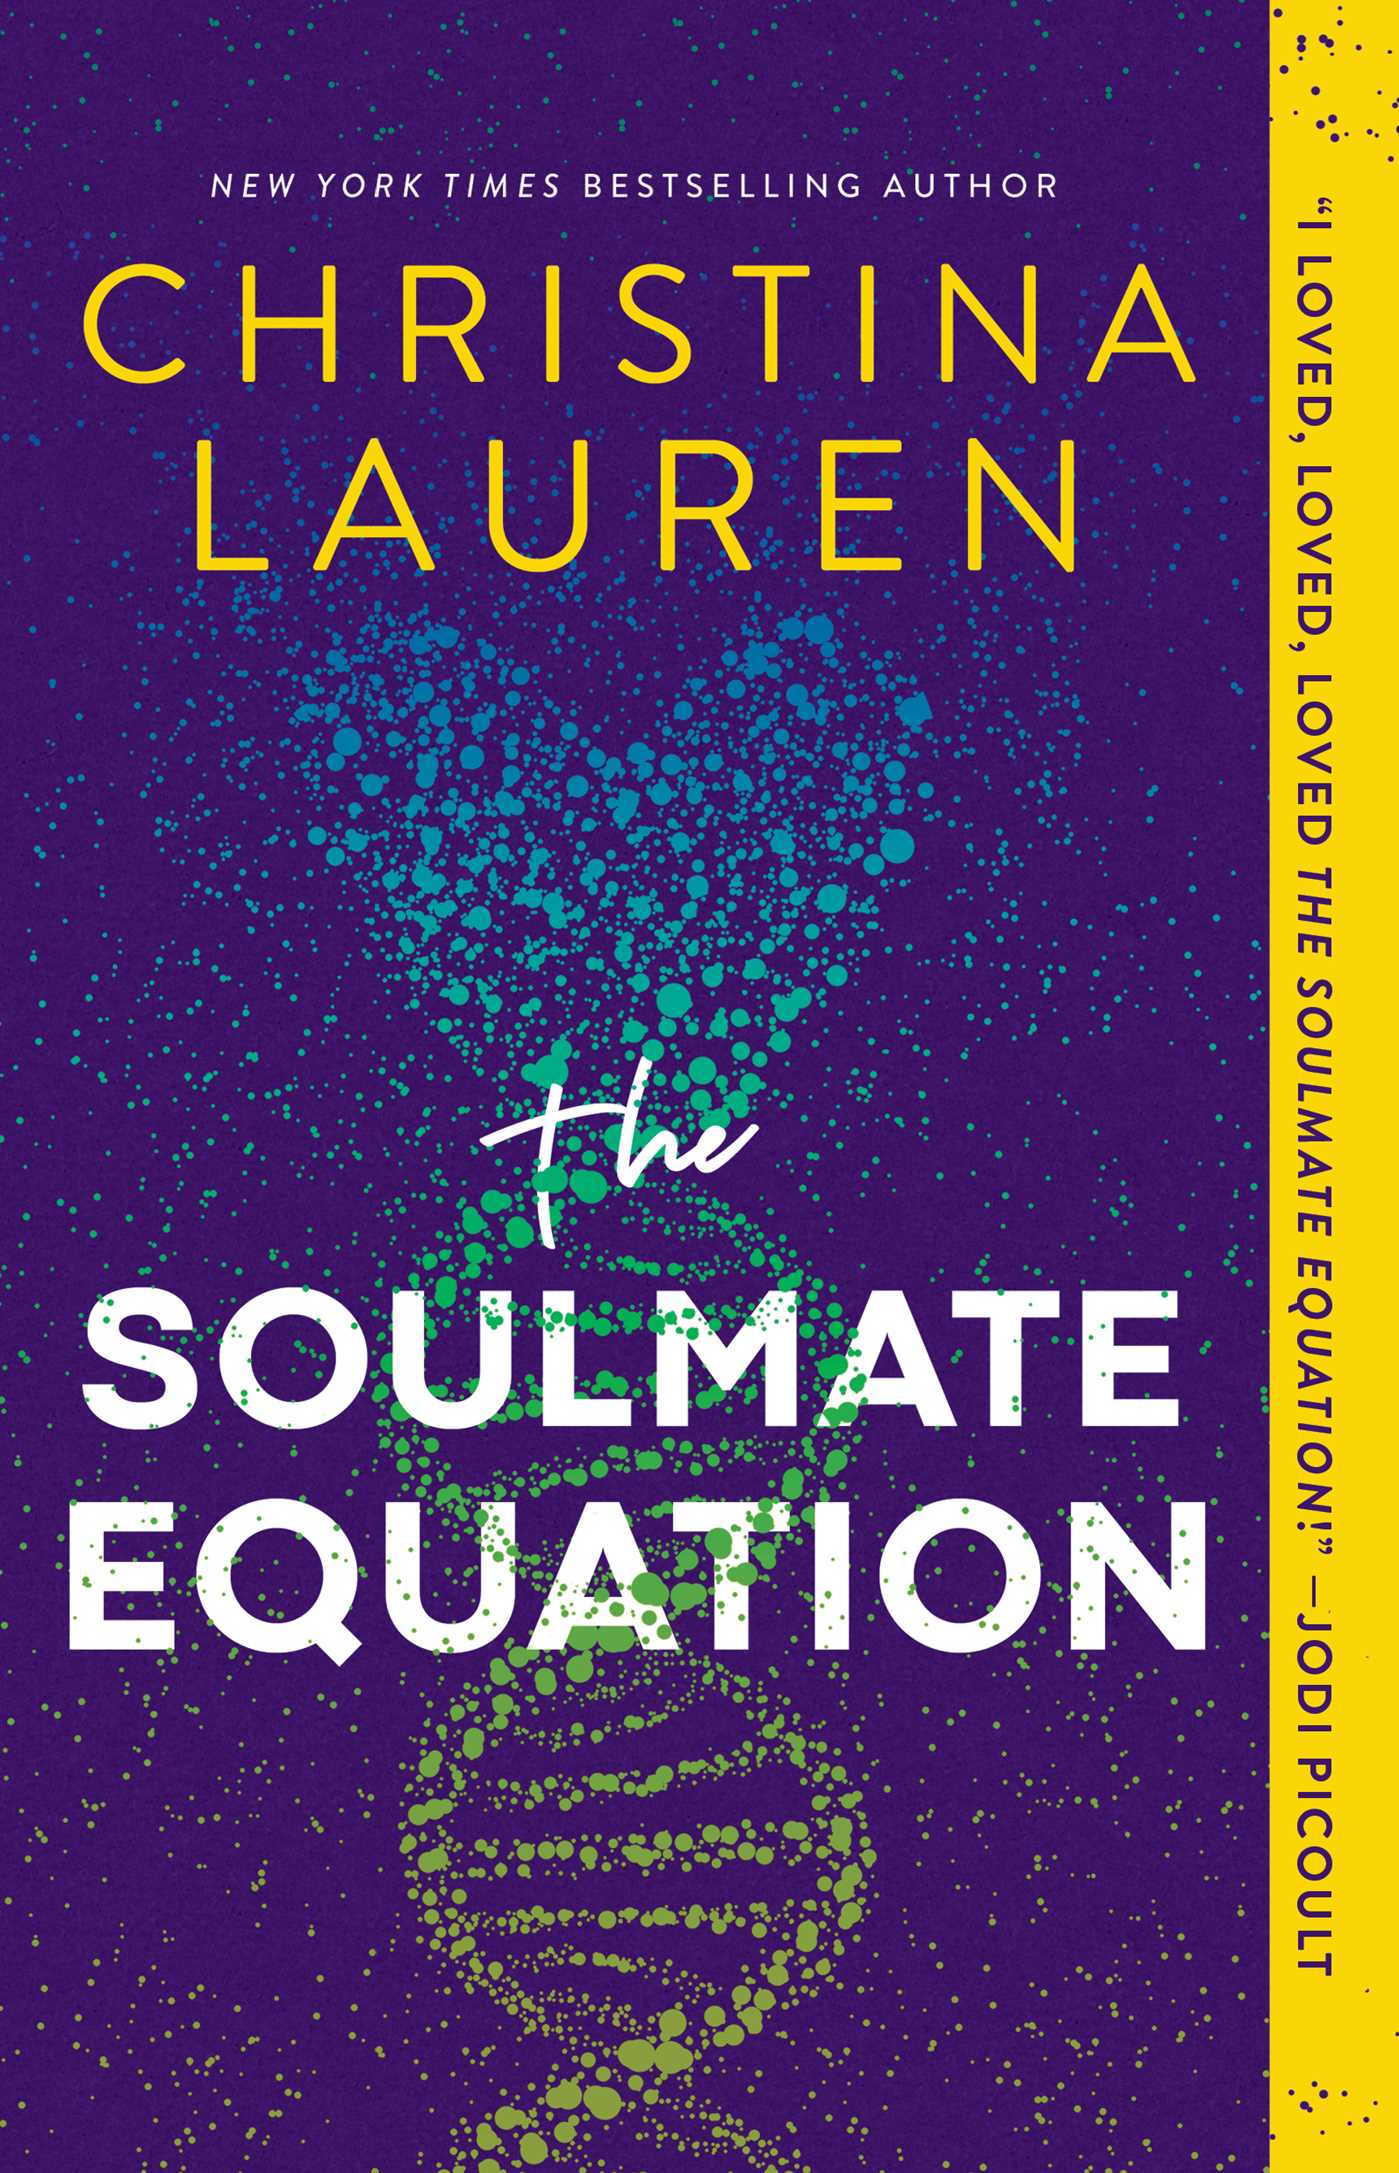 [EPUB] DNADuo #1 The Soulmate Equation by Christina Lauren